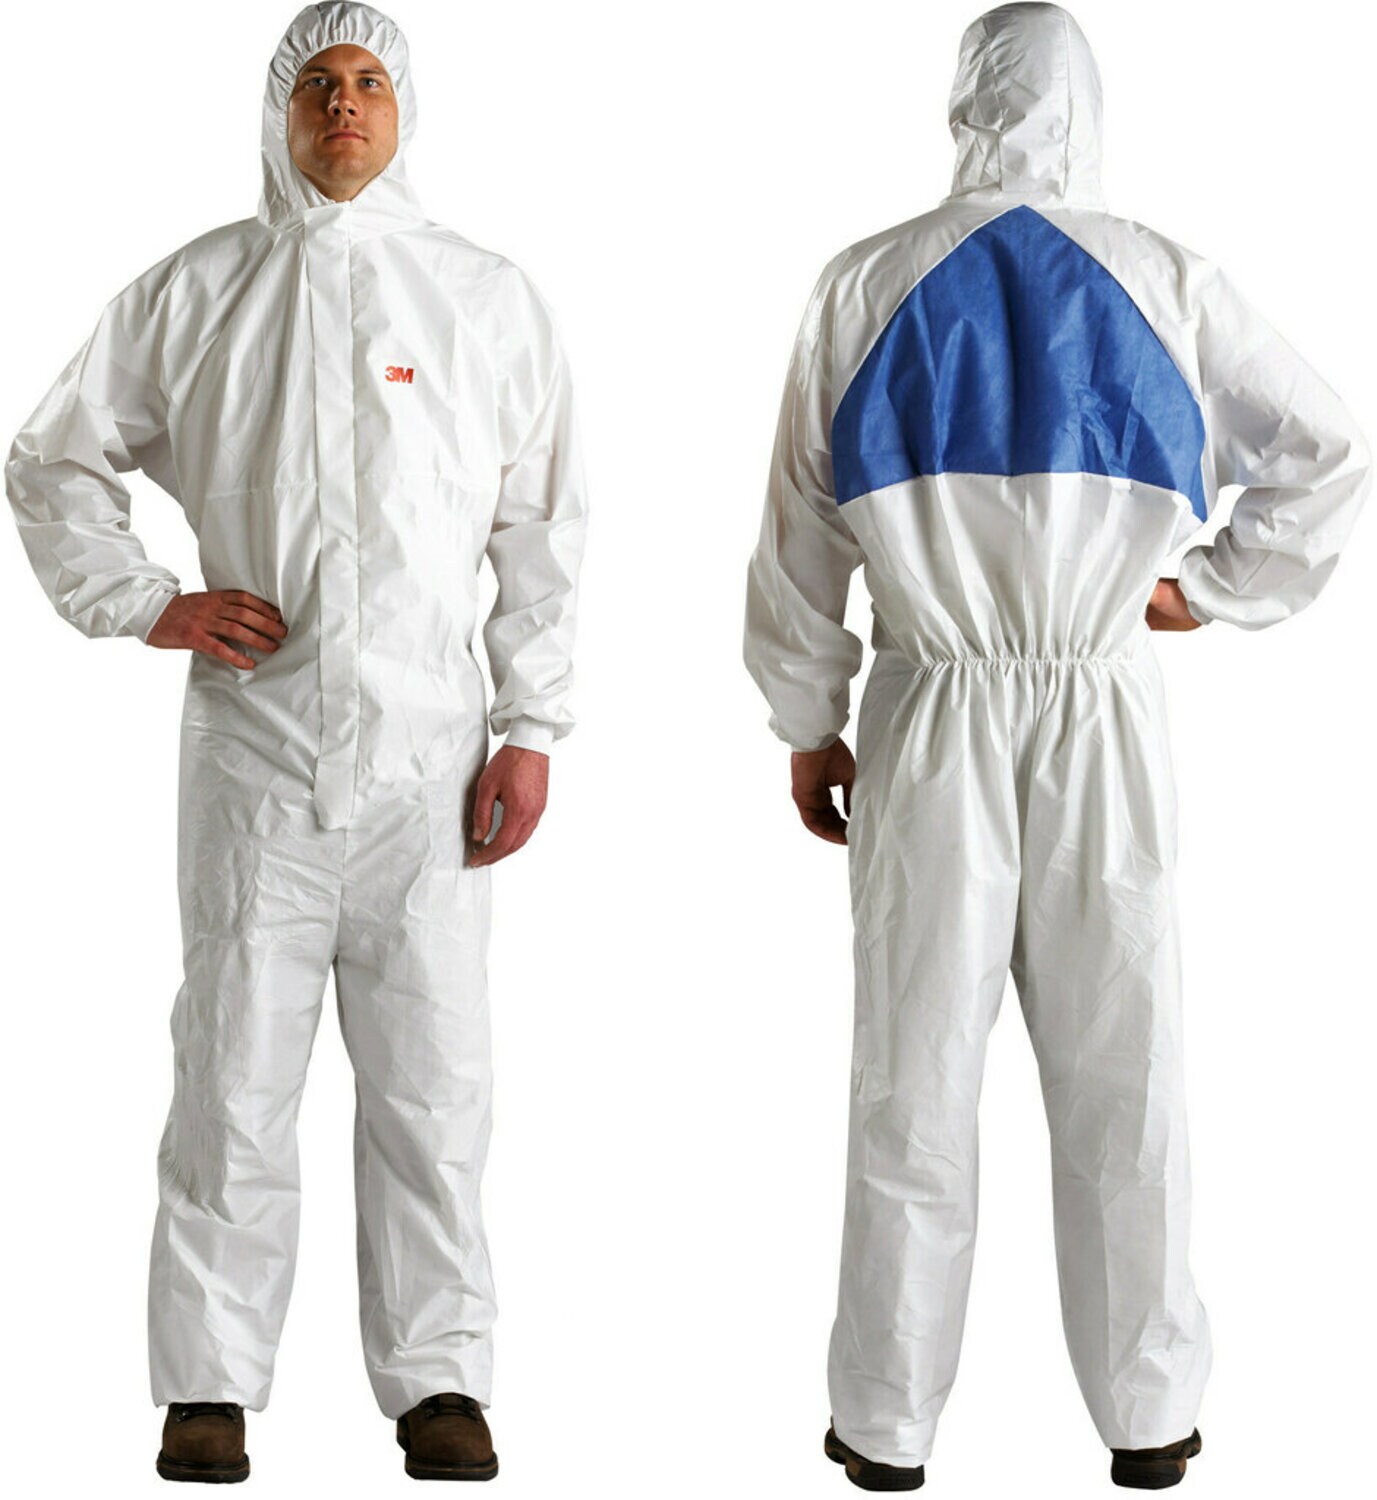 7100213295 - 3M Protective Coverall 4540+ White & Blue Type 5/6 Size 4XL, 25 EA/Case